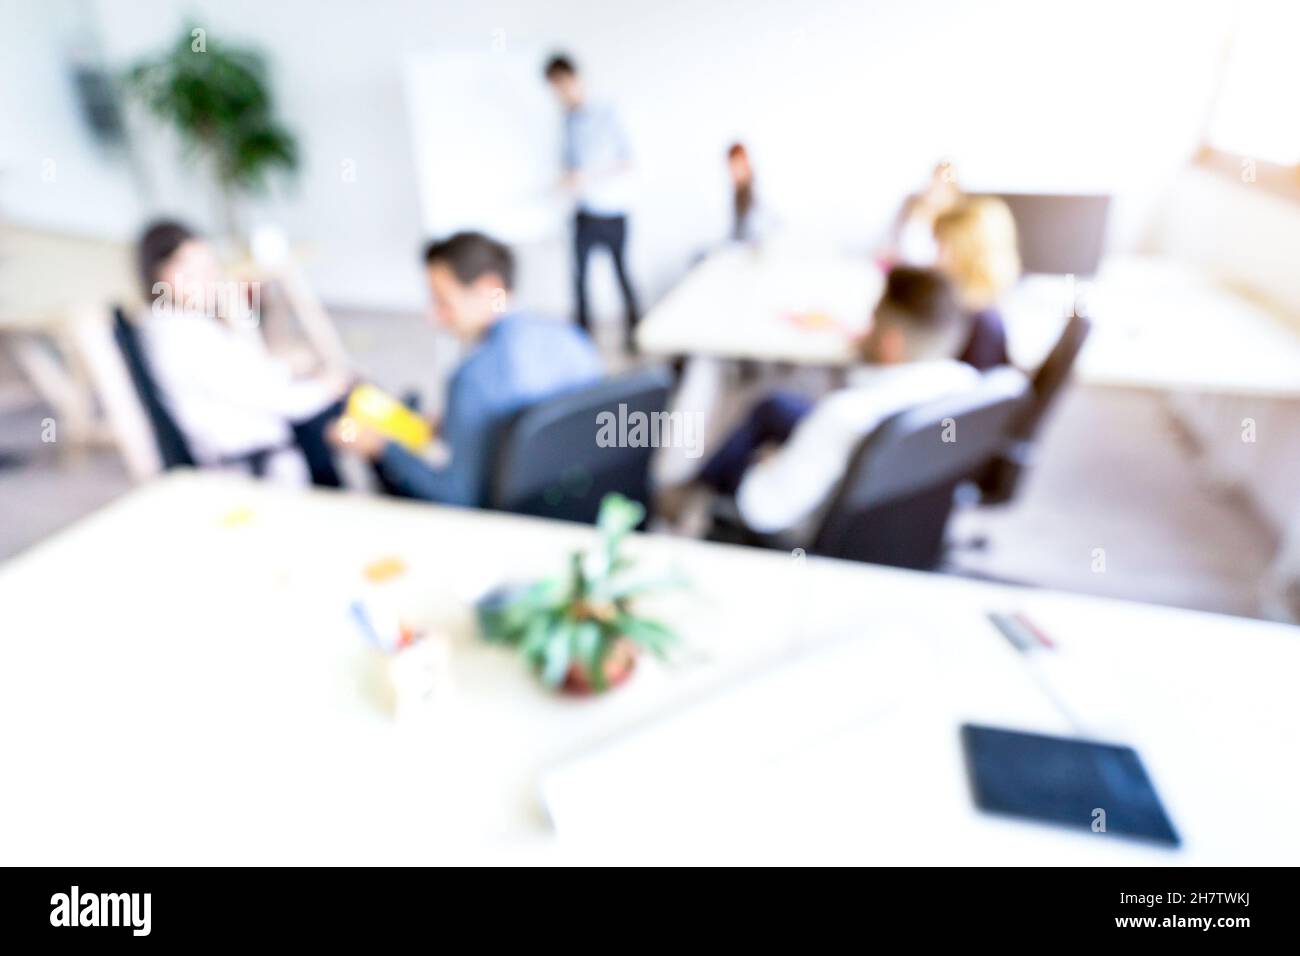 Blurred defocused background of businesspeople meeting with concentrated start up entrepreneur coworkers - Business concept with young people team Stock Photo